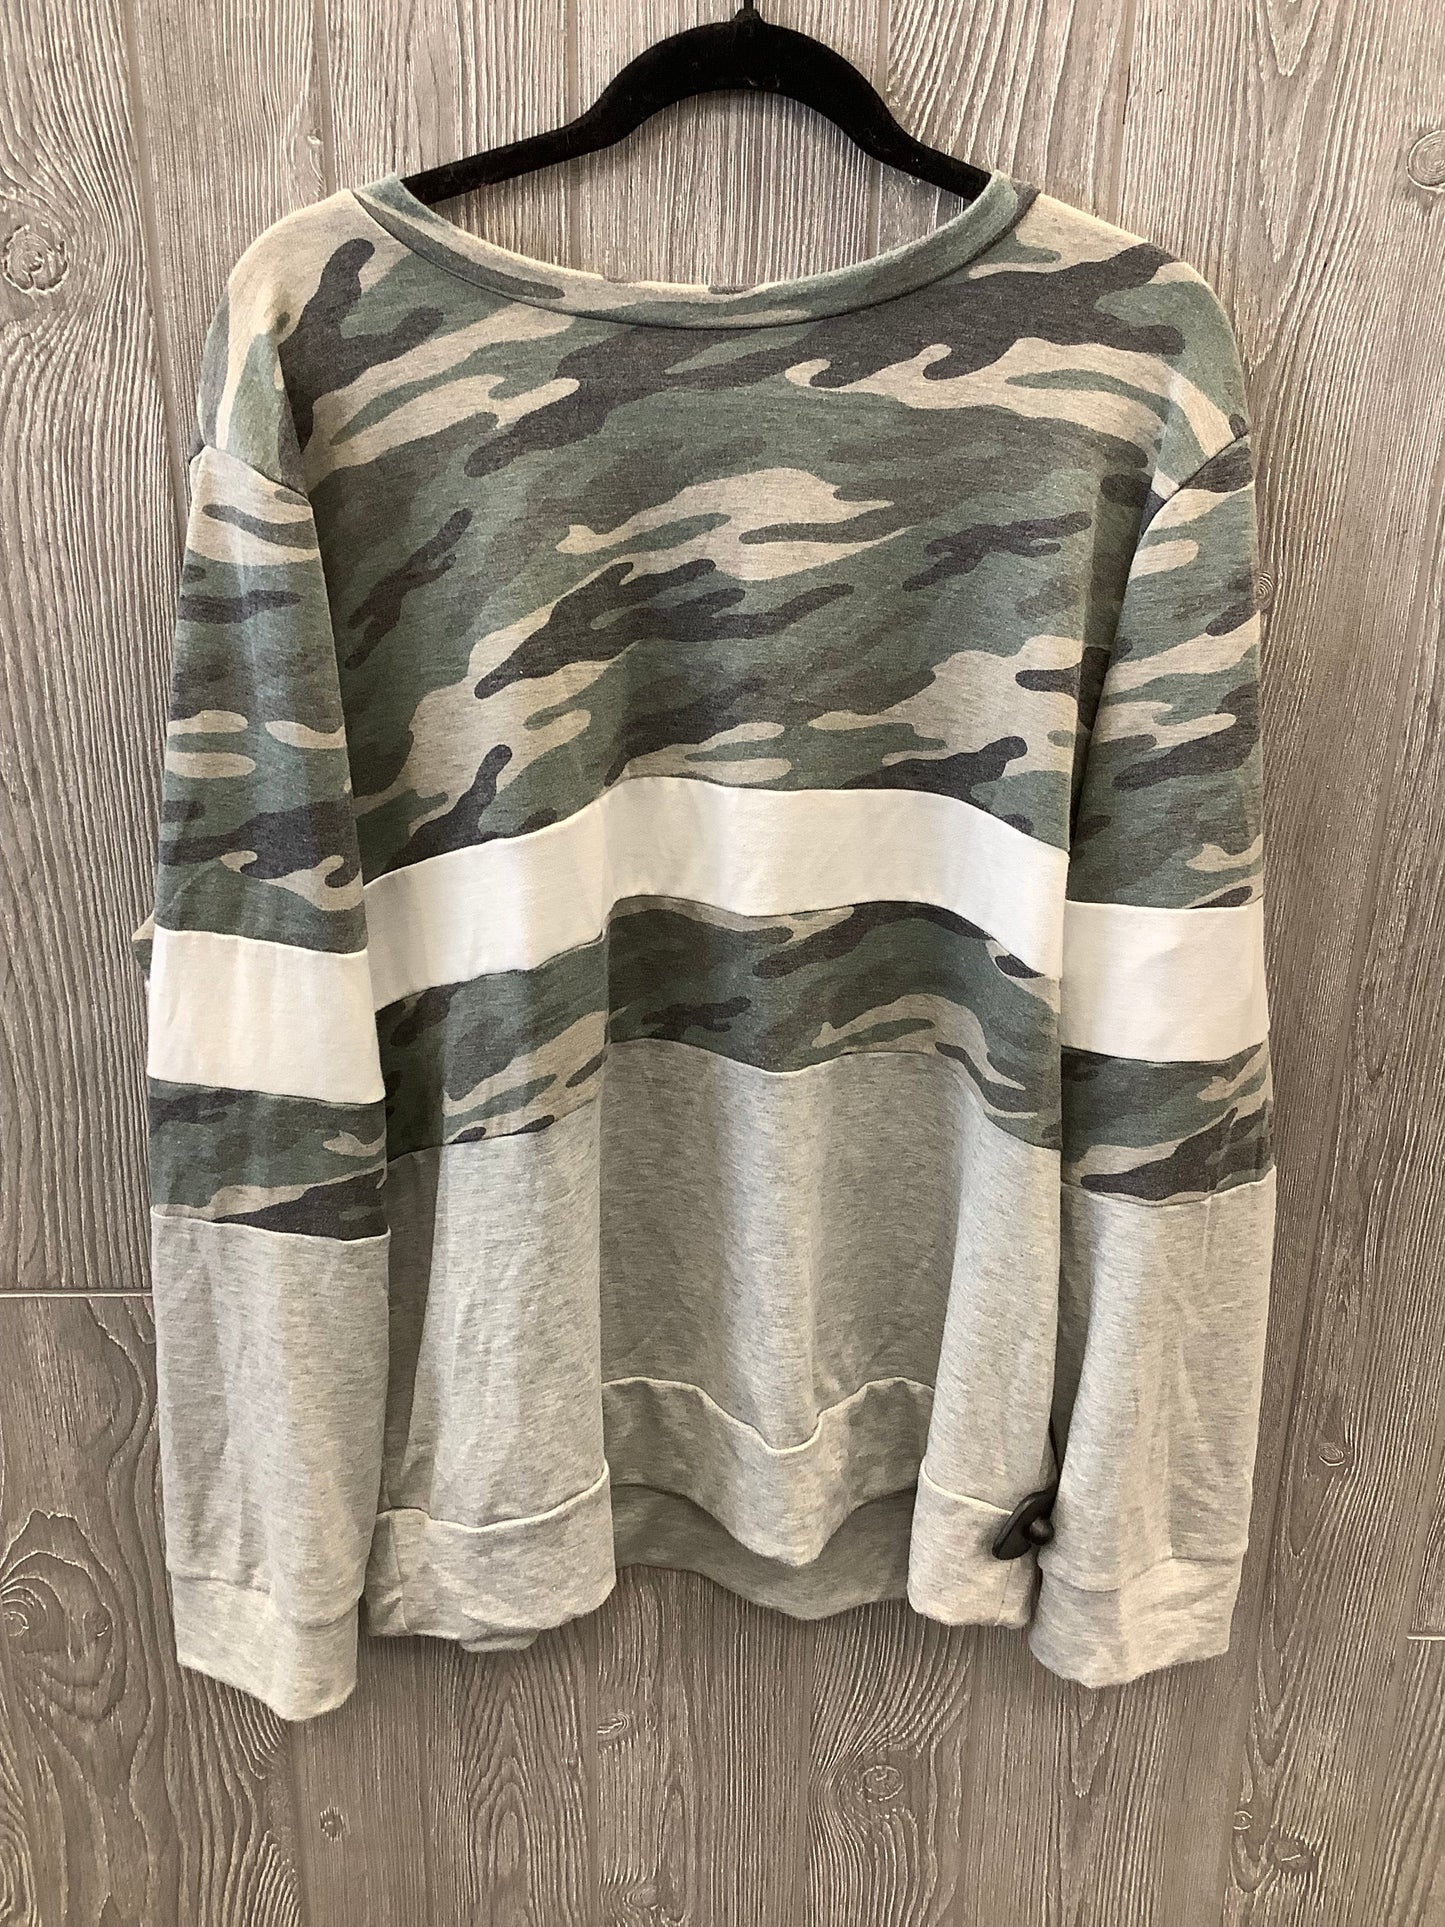 Camouflage Print Top Long Sleeve Clothes Mentor, Size 3x